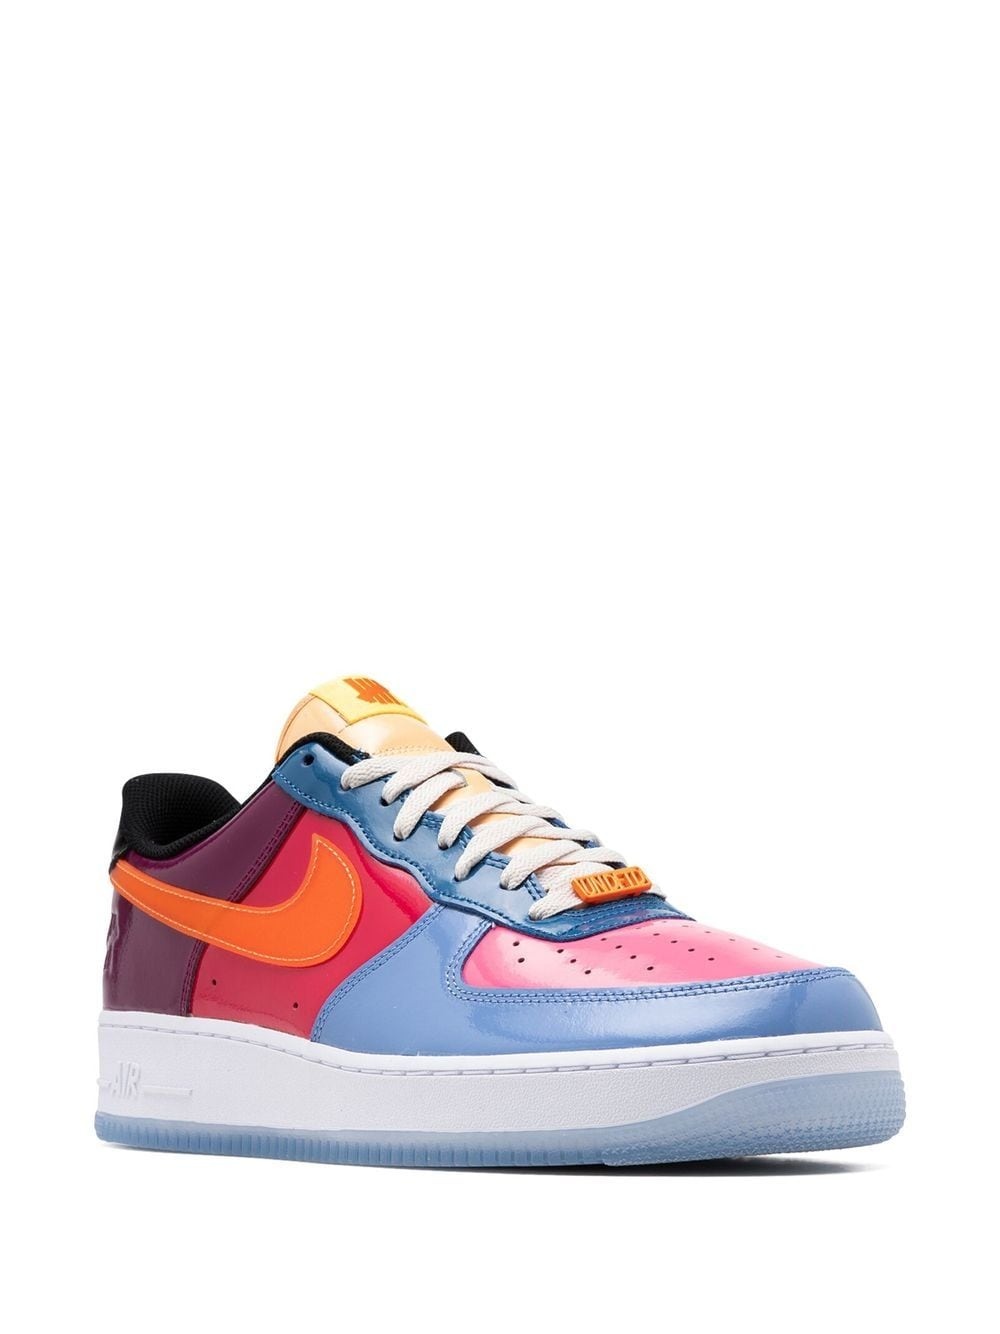 x Undefeated Air Force 1 Low "Multi Patent" sneakers - 2